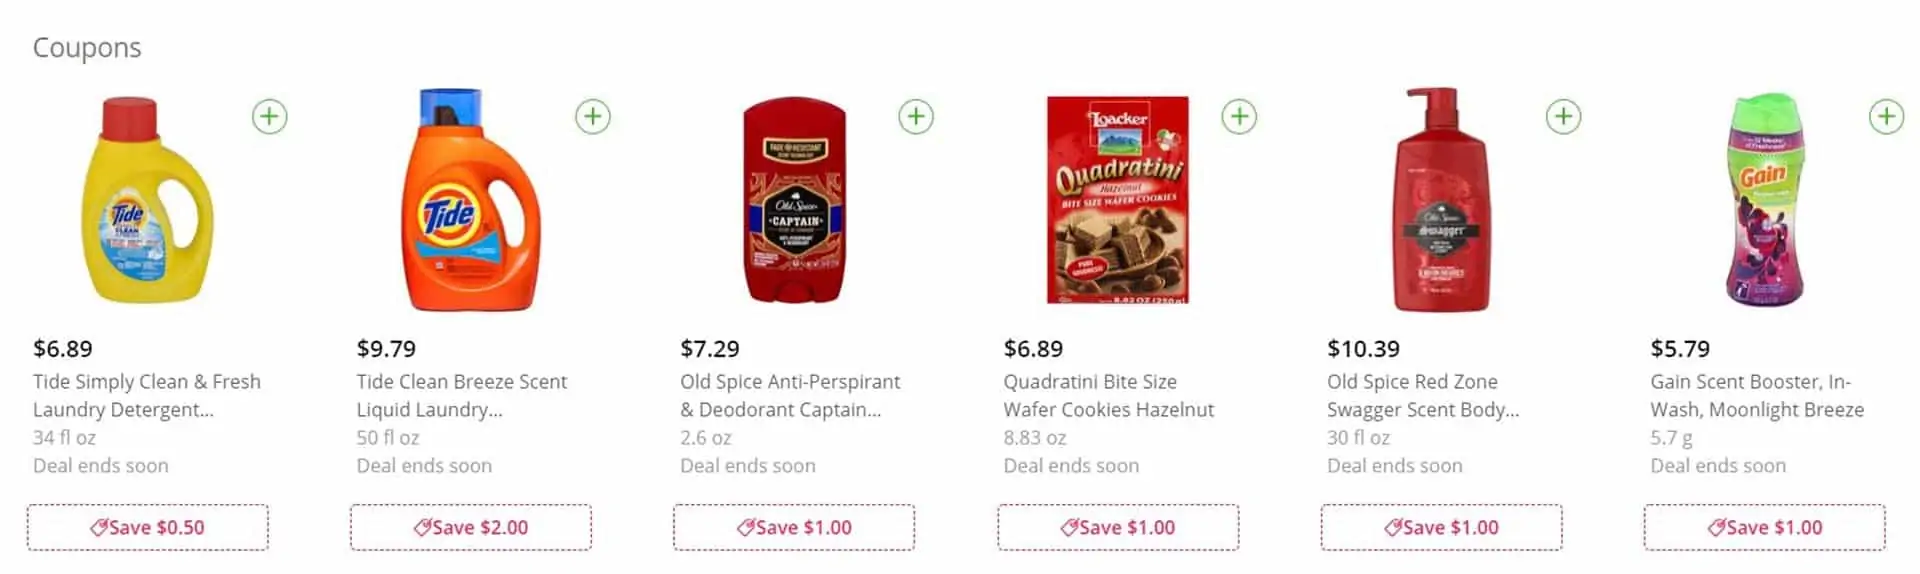 Instacart Coupons for Existing Users